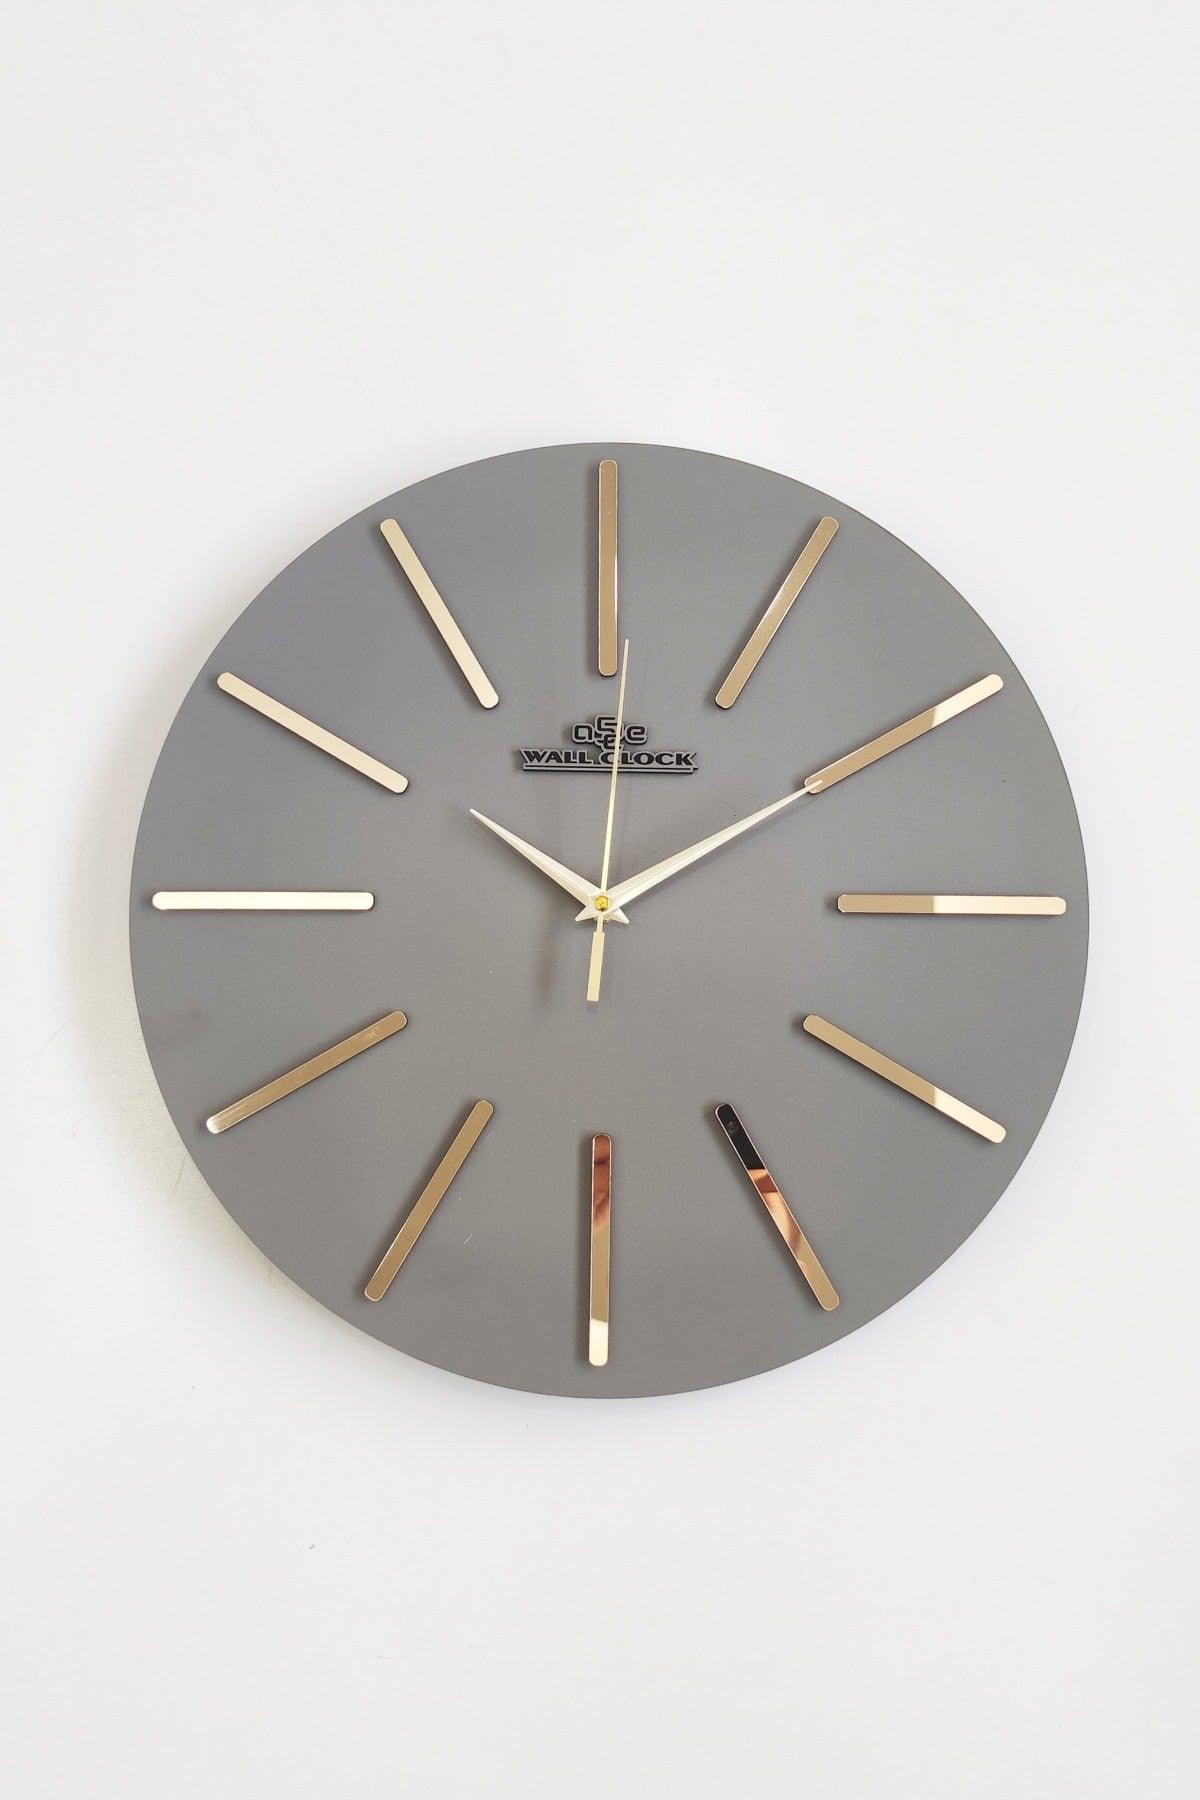 Special Decorative Mirrored Wall Clock Anthracite & Gold Silent Mechanism 37x37cm - Swordslife